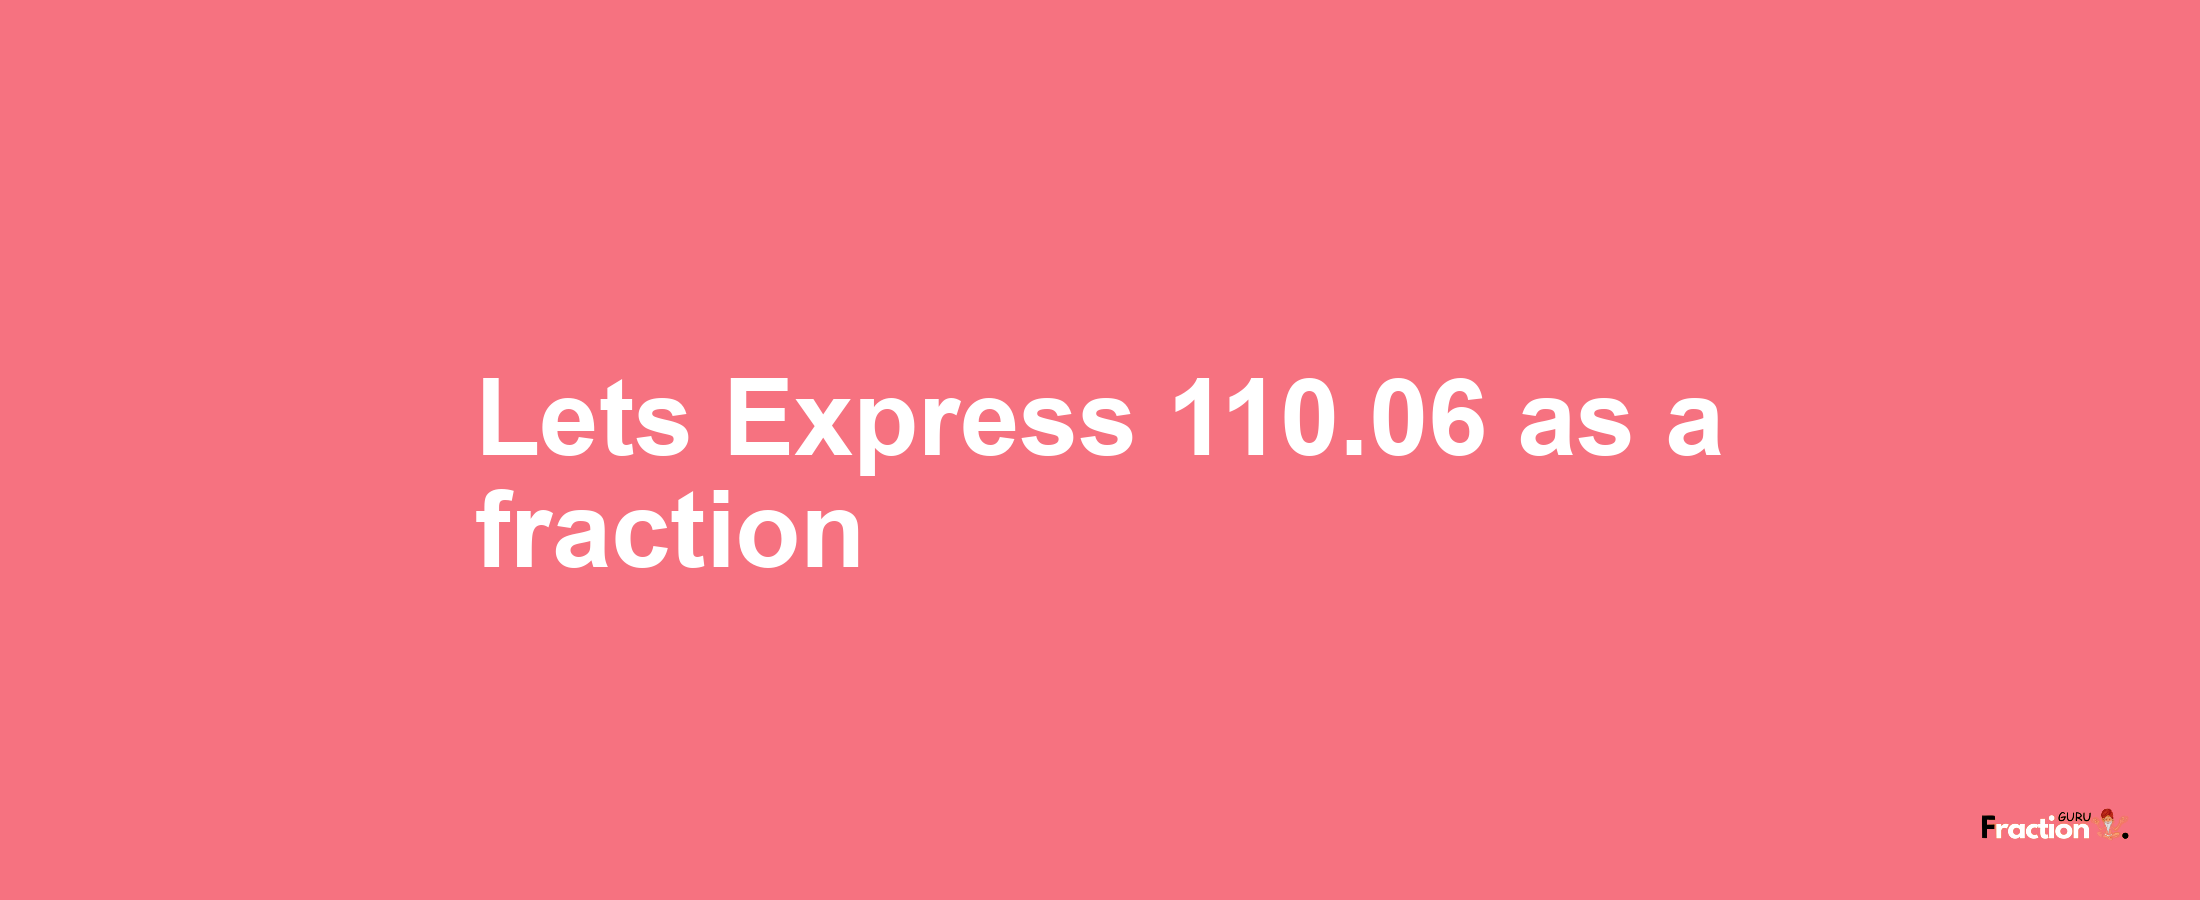 Lets Express 110.06 as afraction